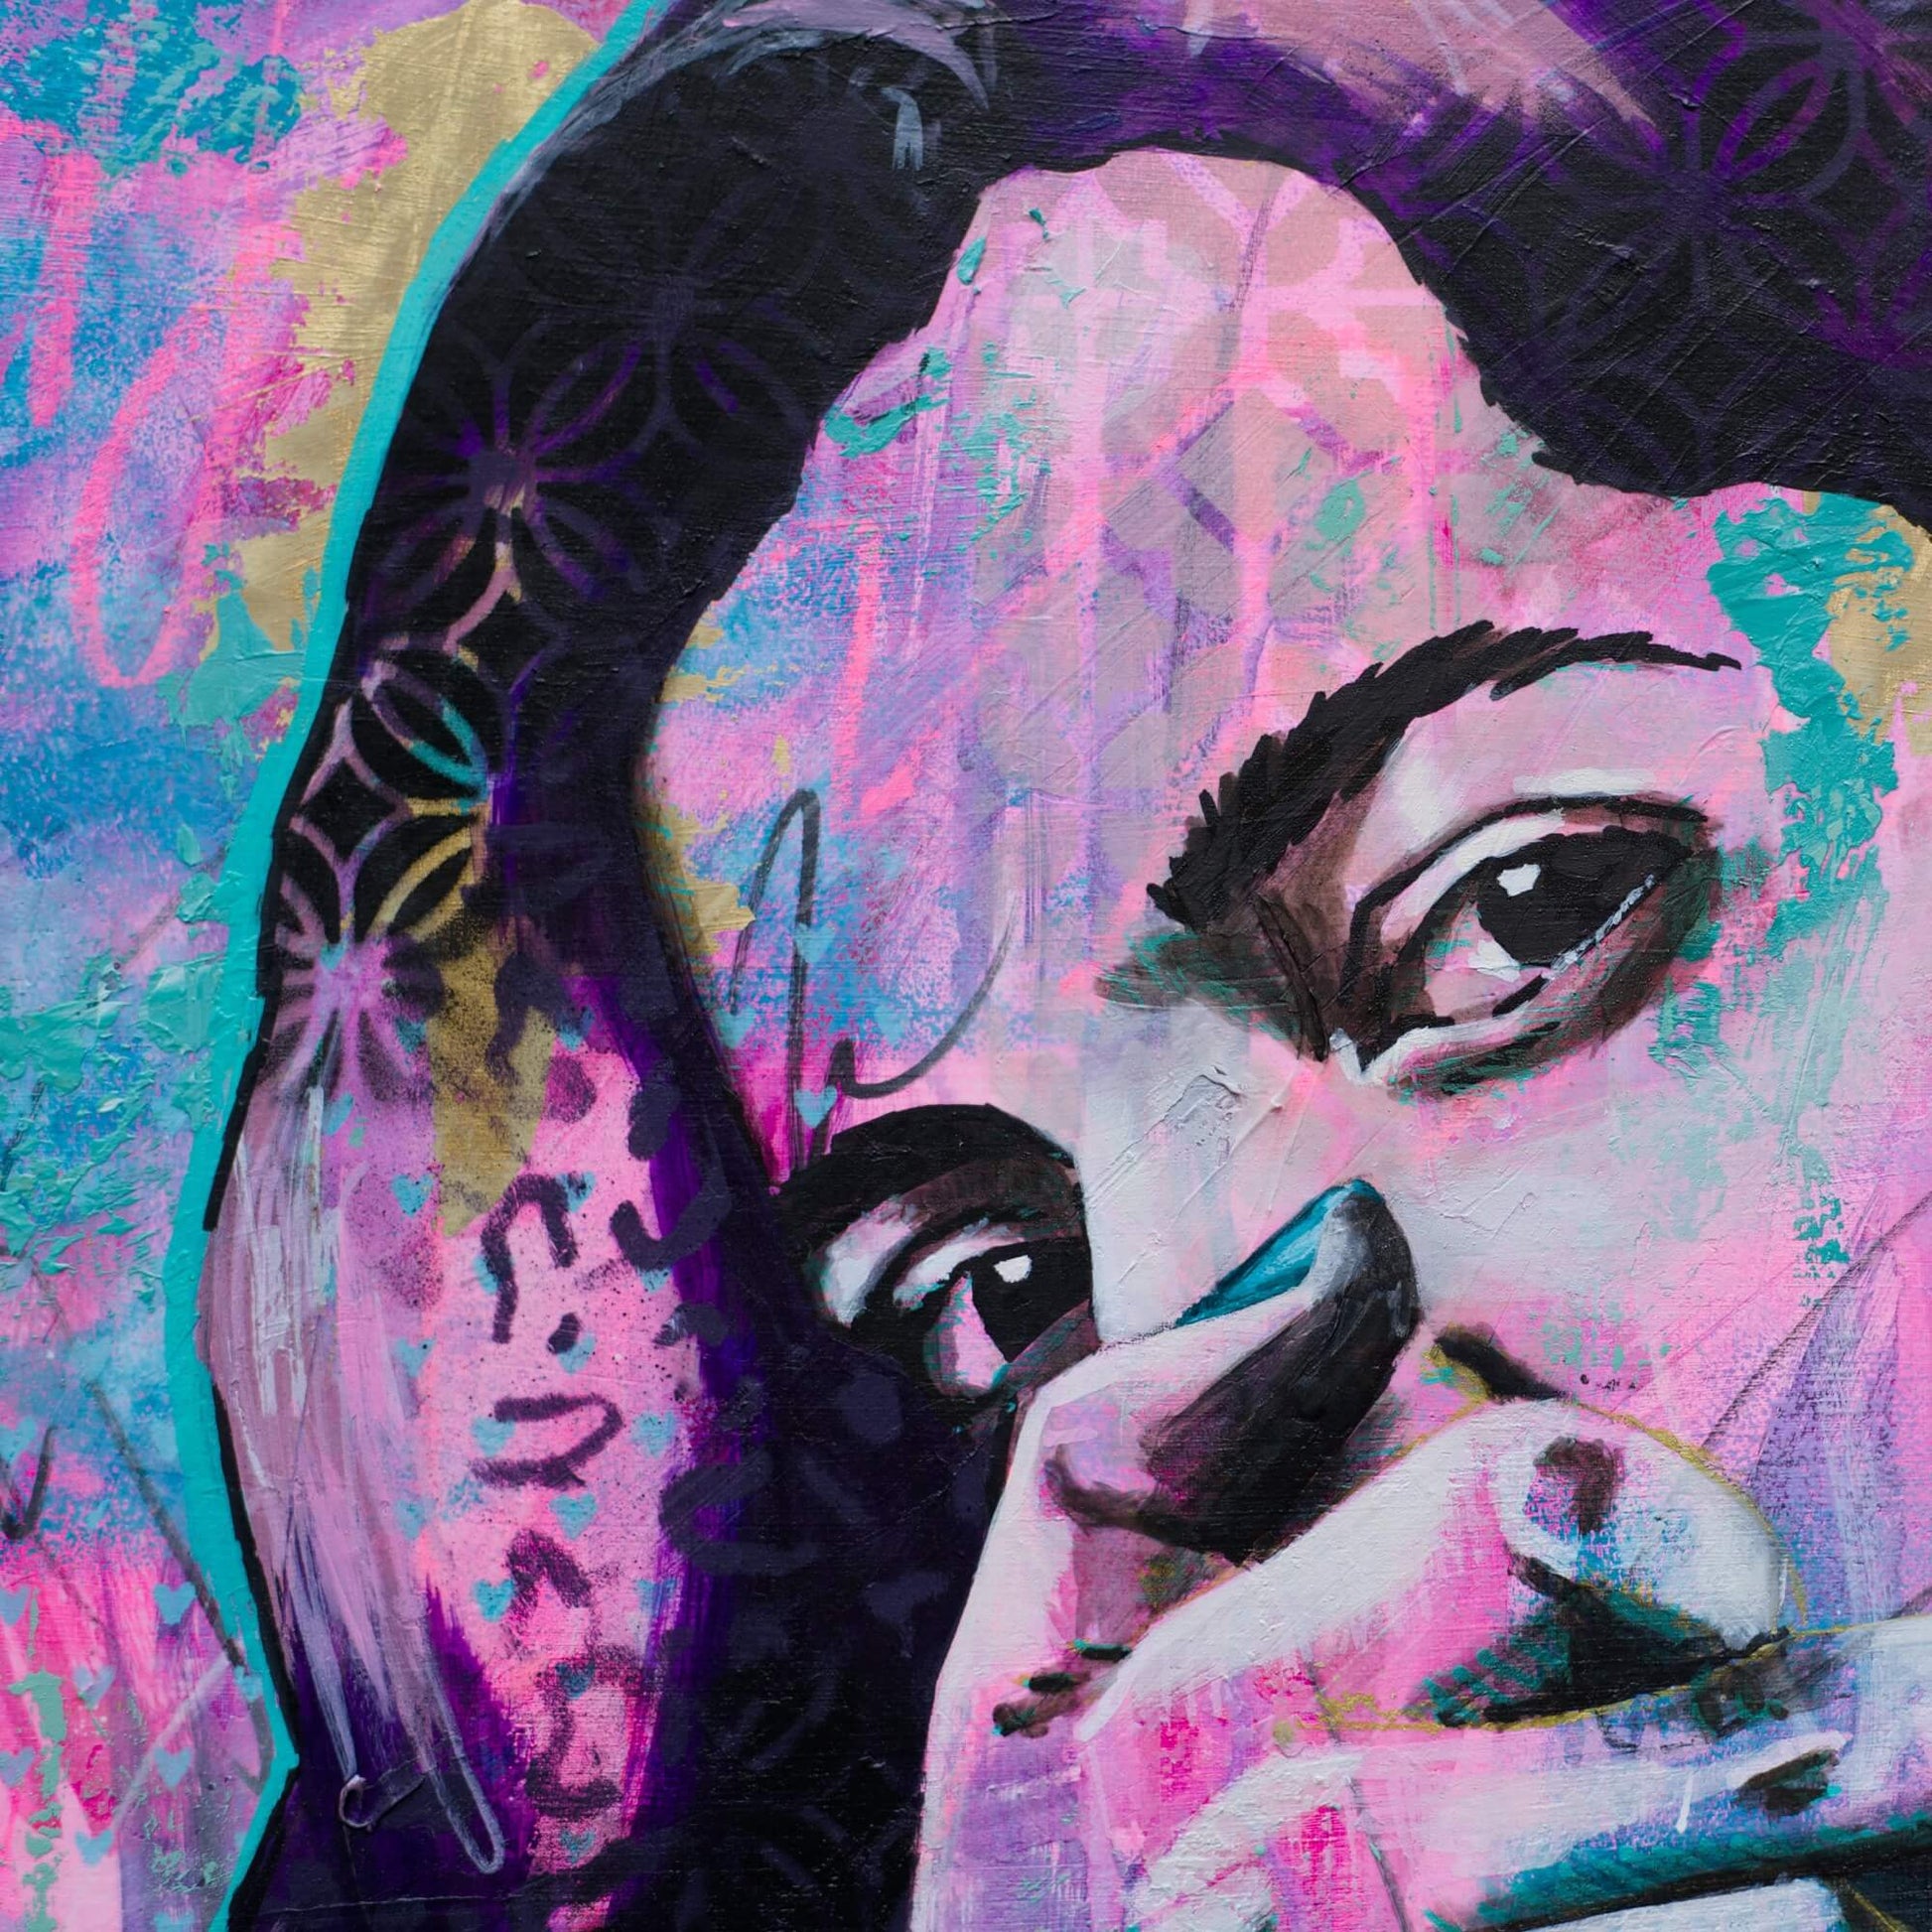 Artworks for Sale – Street Art Painting of Woman - Purple, Hot Pink & Teal – 'Take a Break' – Art Wall Painting Criss Chaney